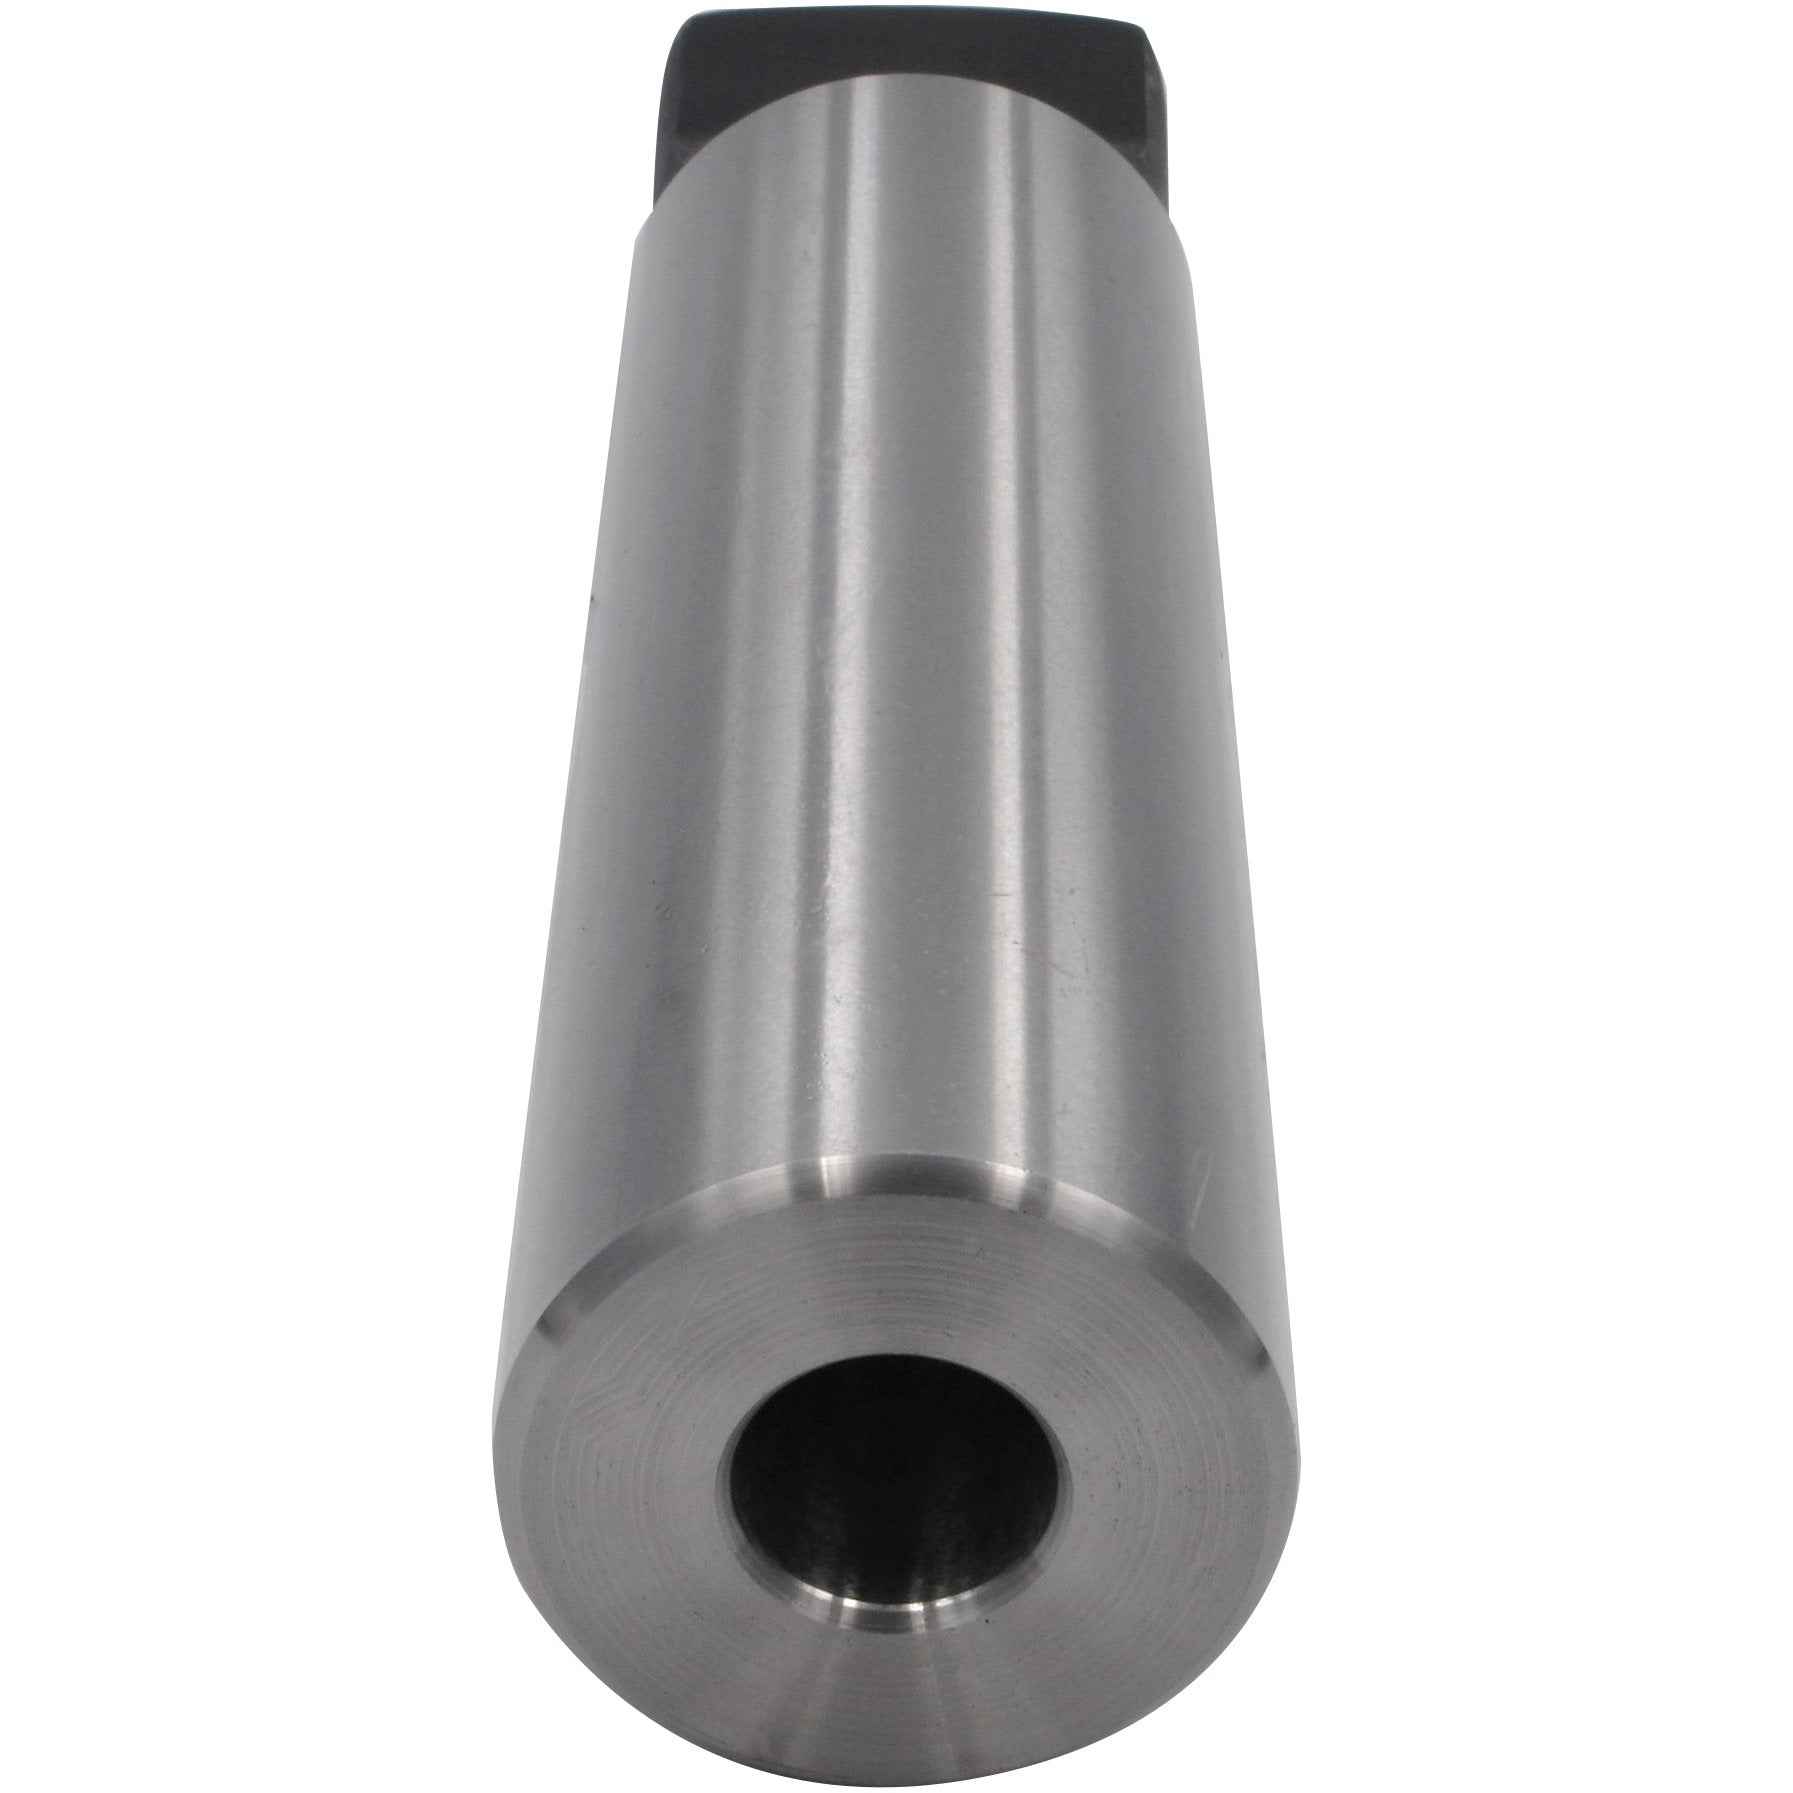 MT2 to MT5 Morse Taper Adapter Reducing Drill Sleeve